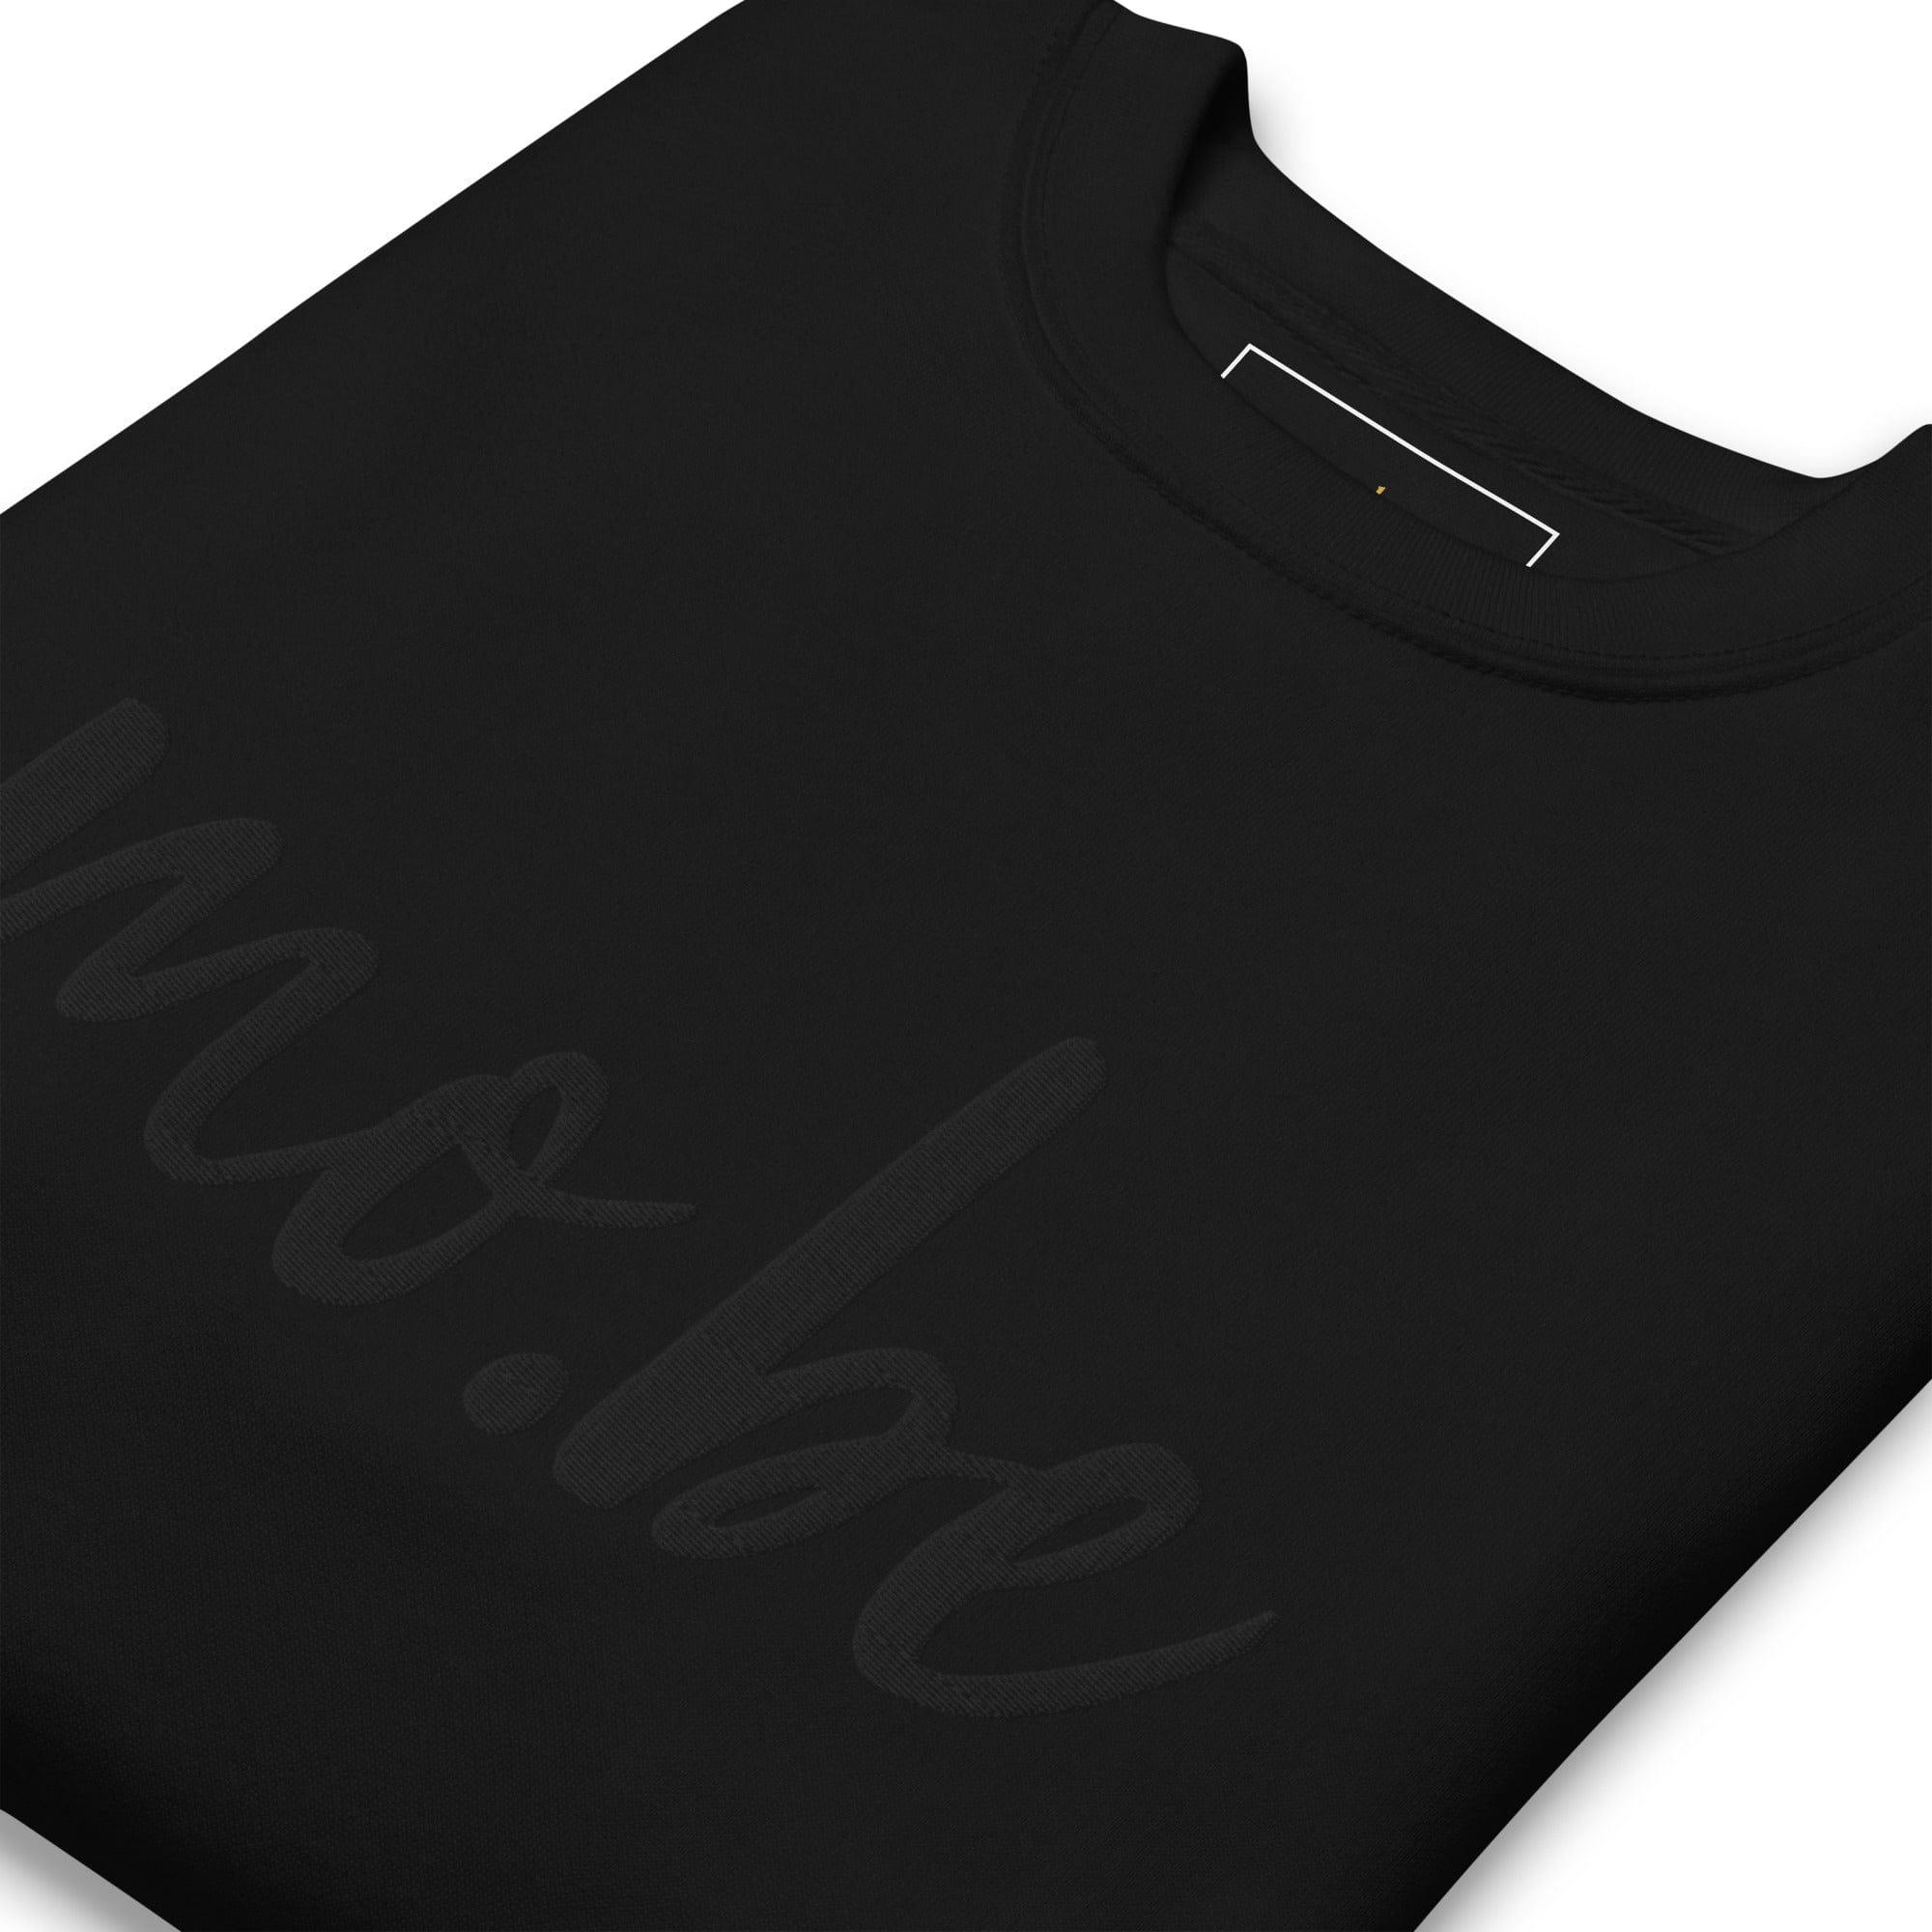 matte mo.be embroidered sweatshirt - mo.be